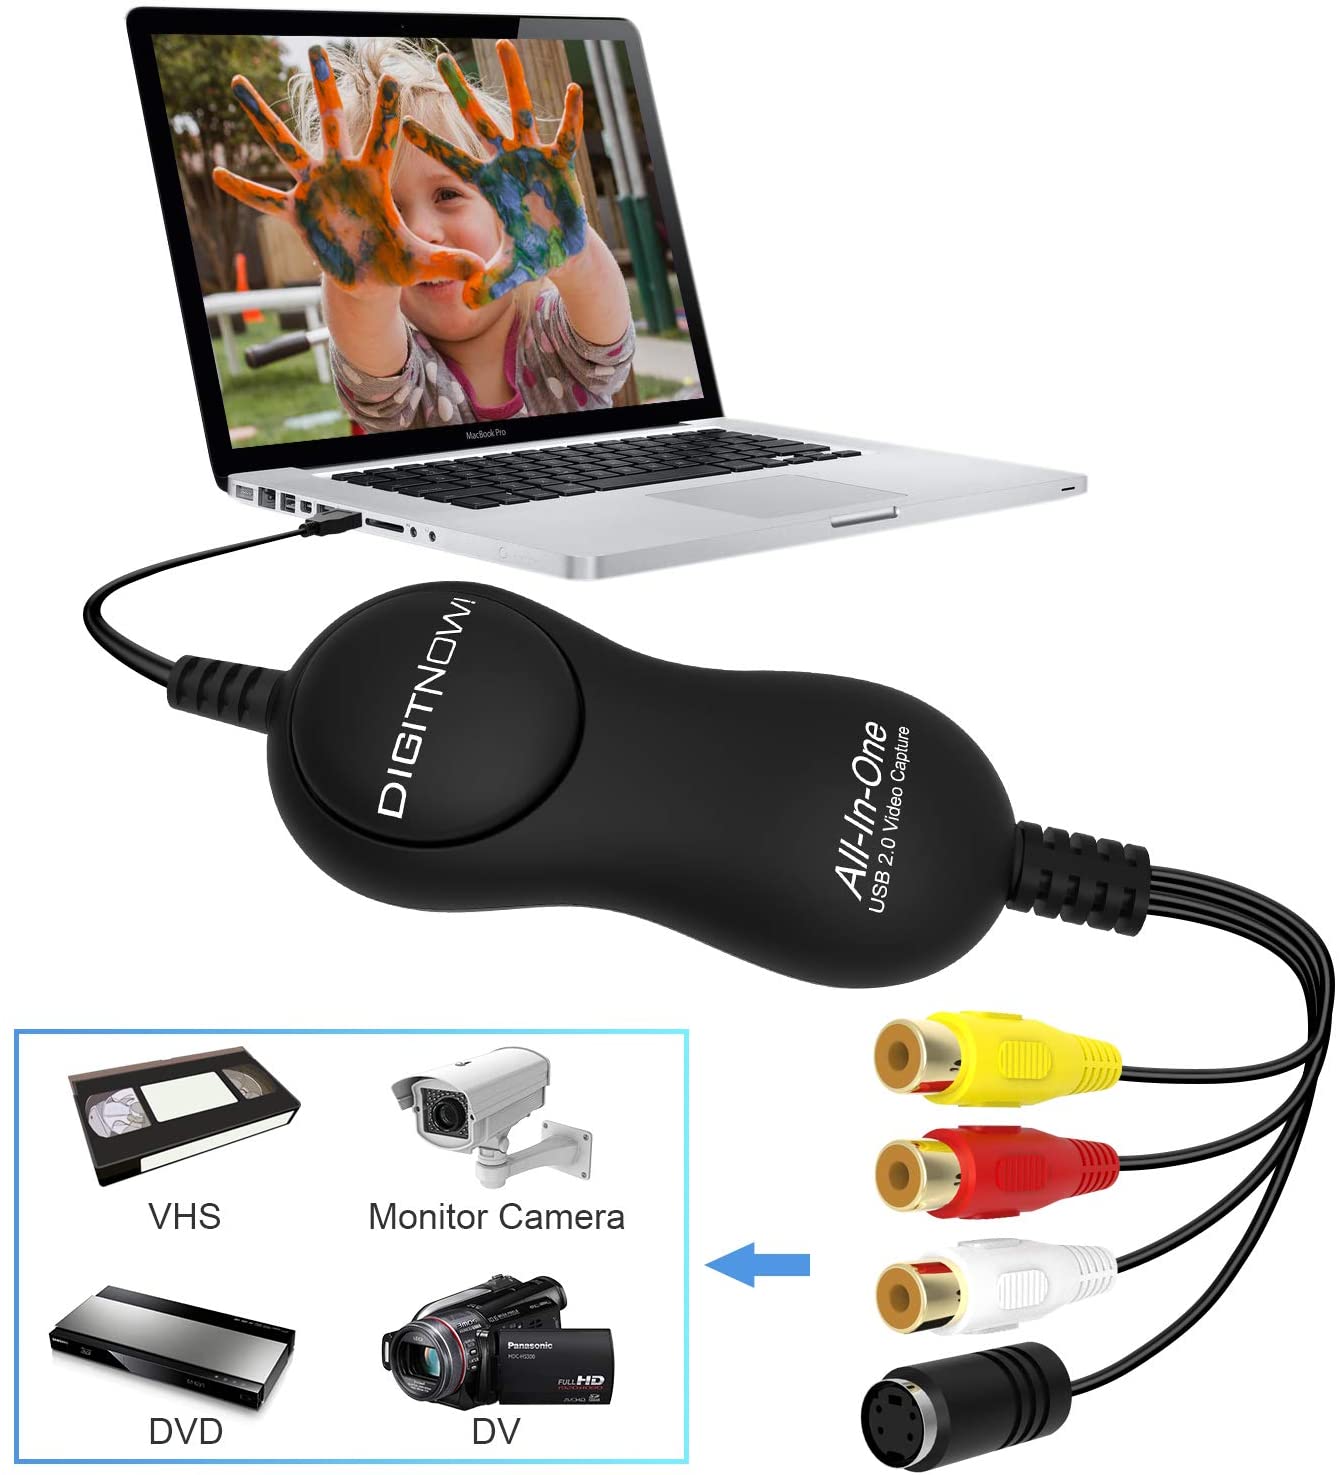 DIGITNOW USB 2.0 Video Capture Card Device Video Grabber One Touch VHS VCR TV to DVD Converter, Transfer VHS Home Videos to Mac OS X PC Windows 7 8 10